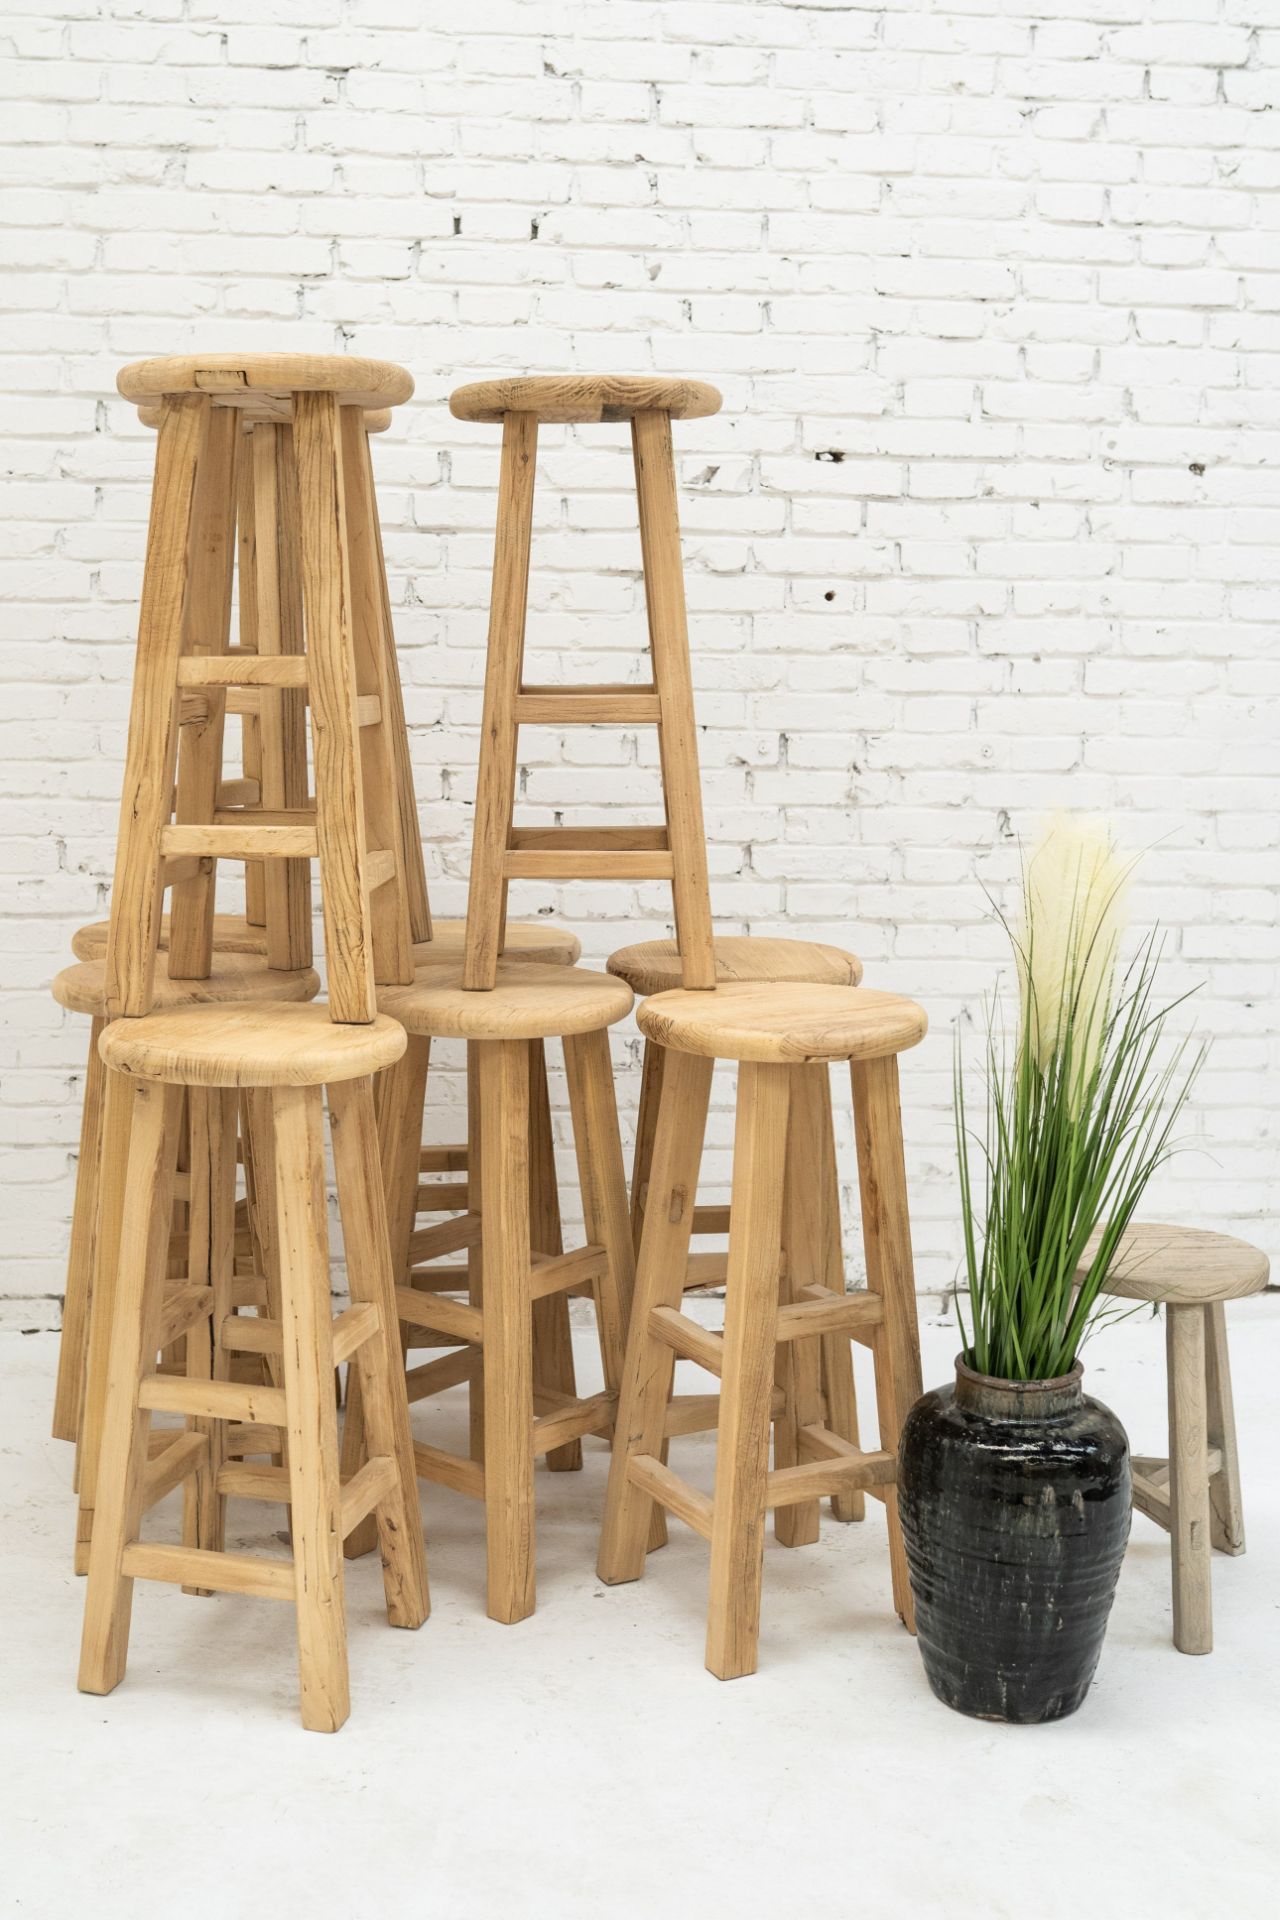 Tall Elm Stool: Stunning wooden bar stools from the Heibei province of China.